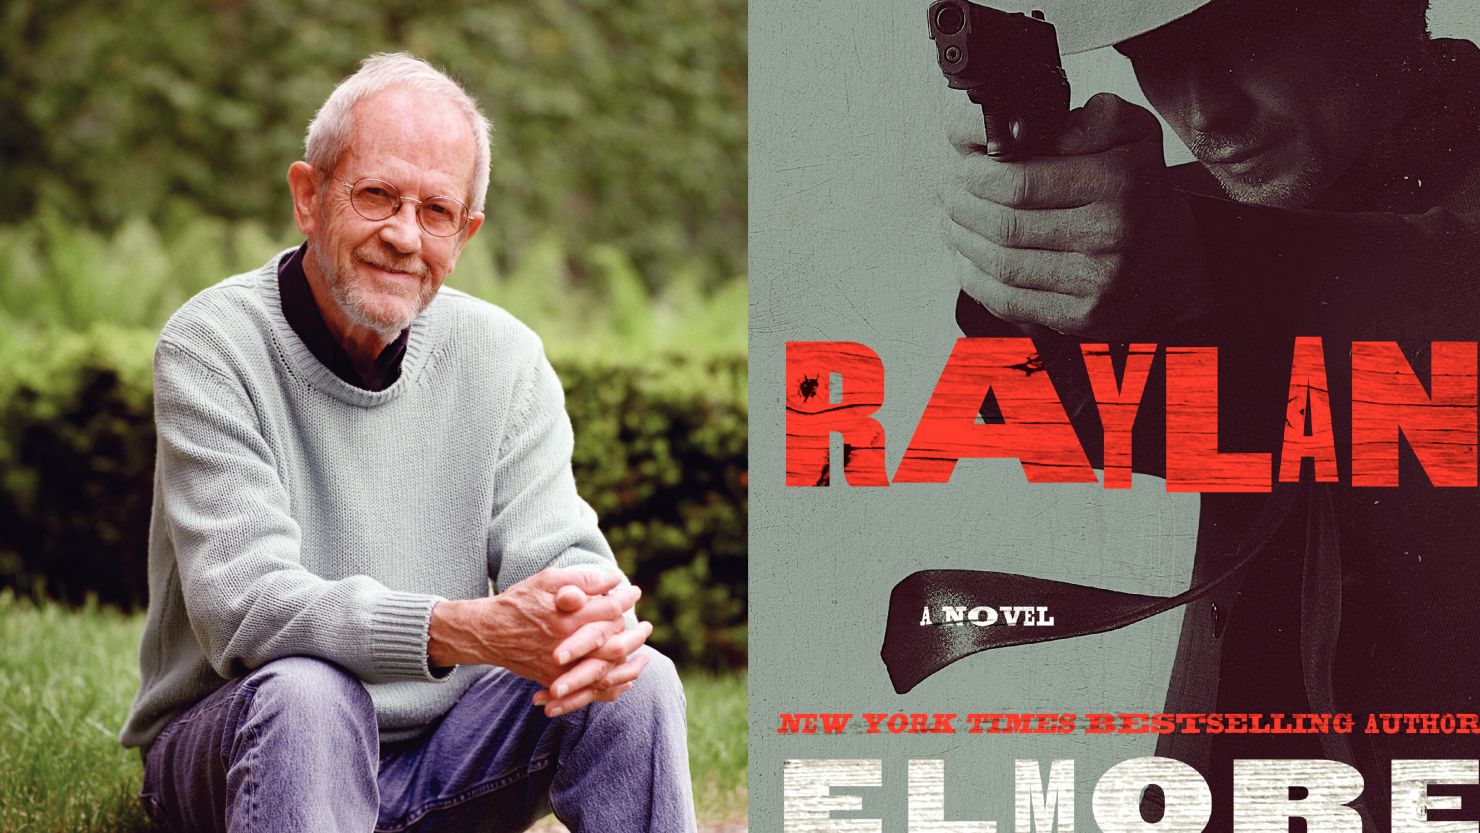 Author Elmore Leonard returns to one of his favorite characters in "Raylan." 